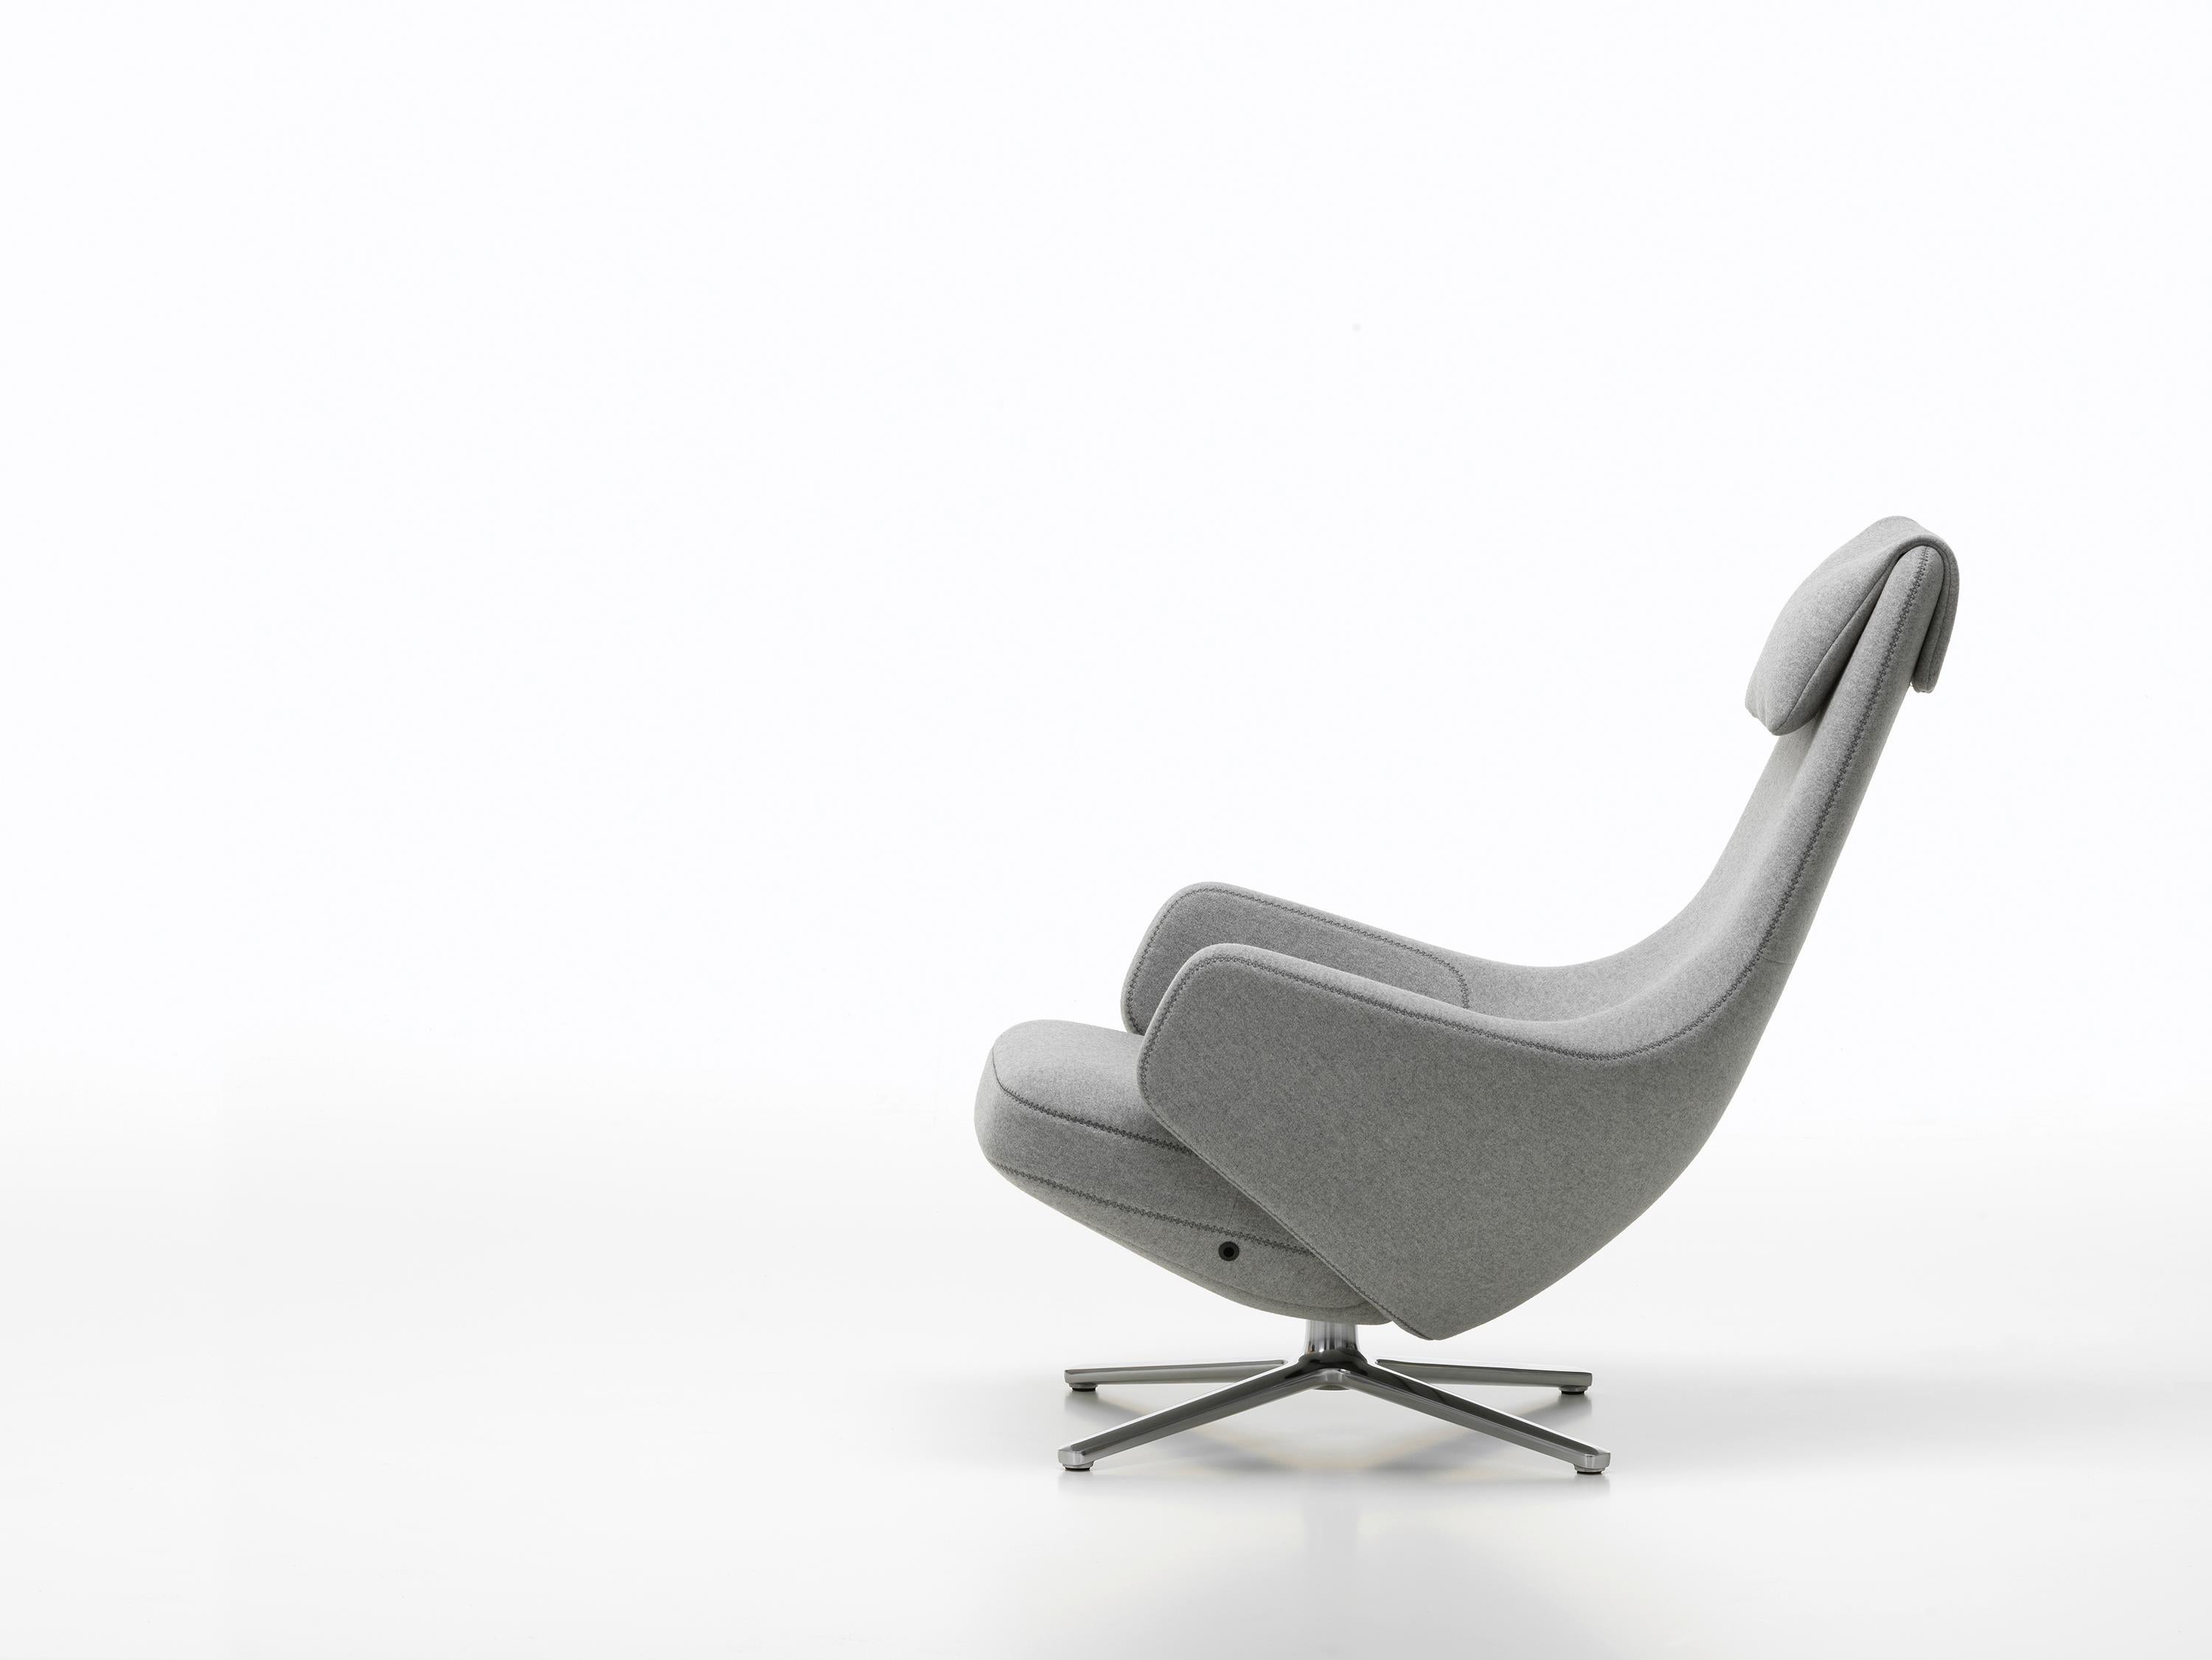 Vitra Repos Lounge Chair in Pebble Grey Cosy by Antonio Citterio For Sale 6